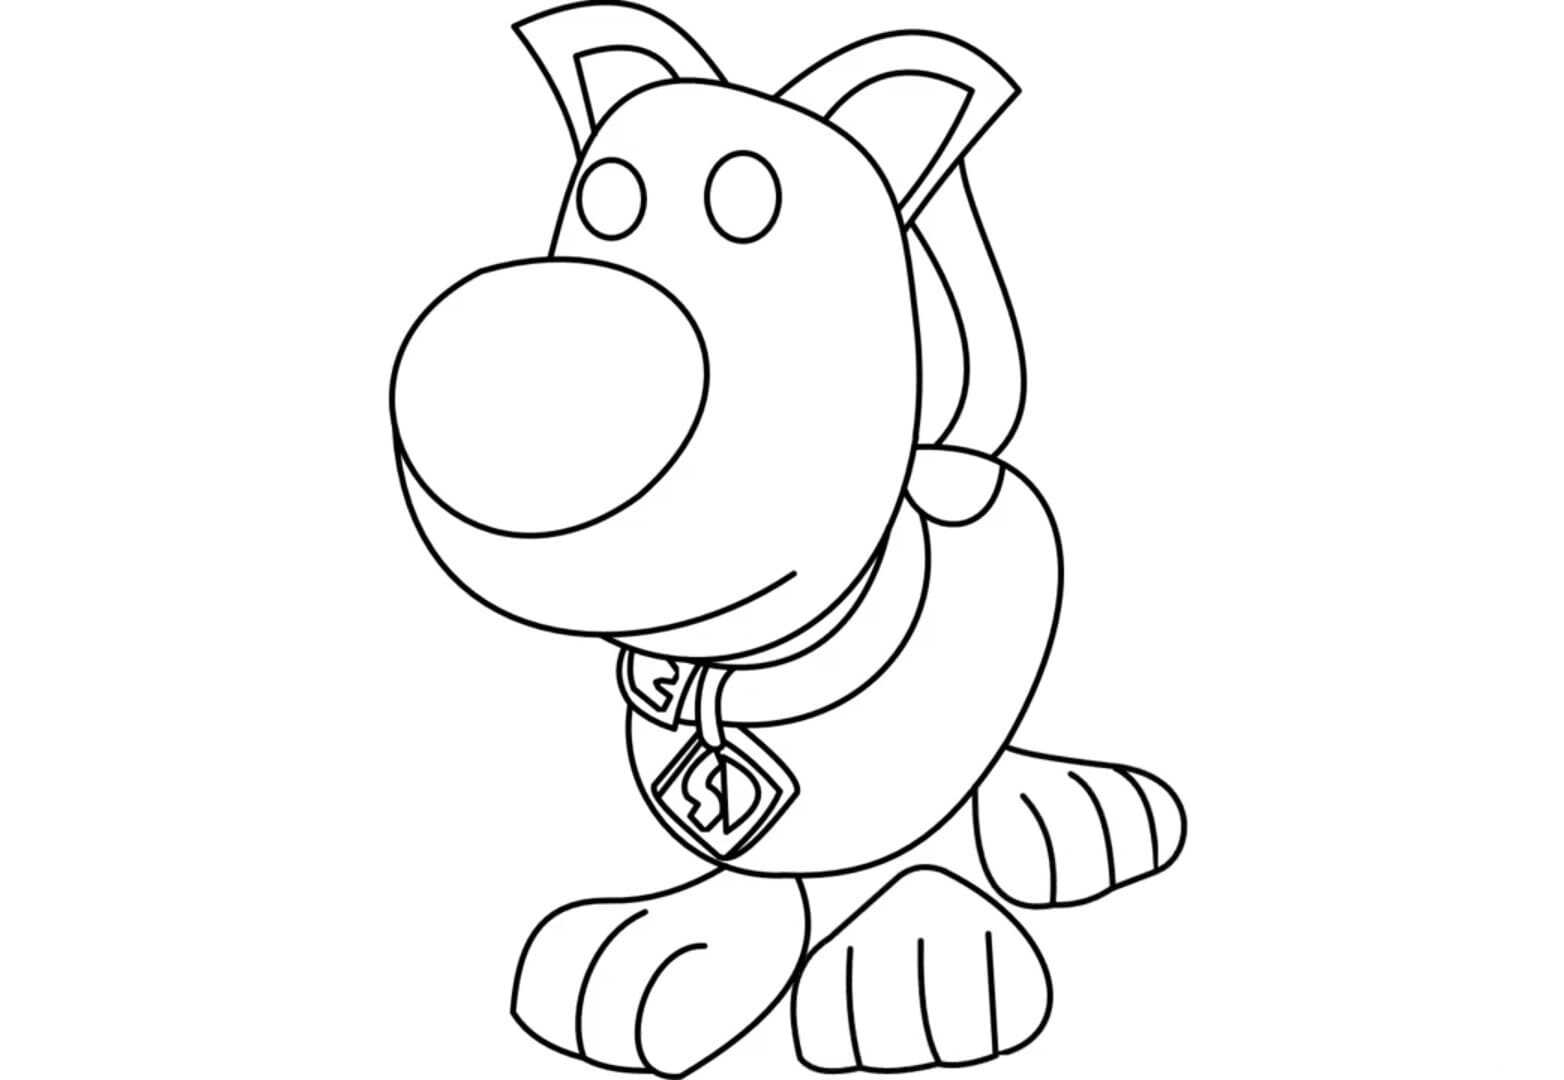 Adopt me Scooby-doo has a long tail pointing upwards Coloring Page